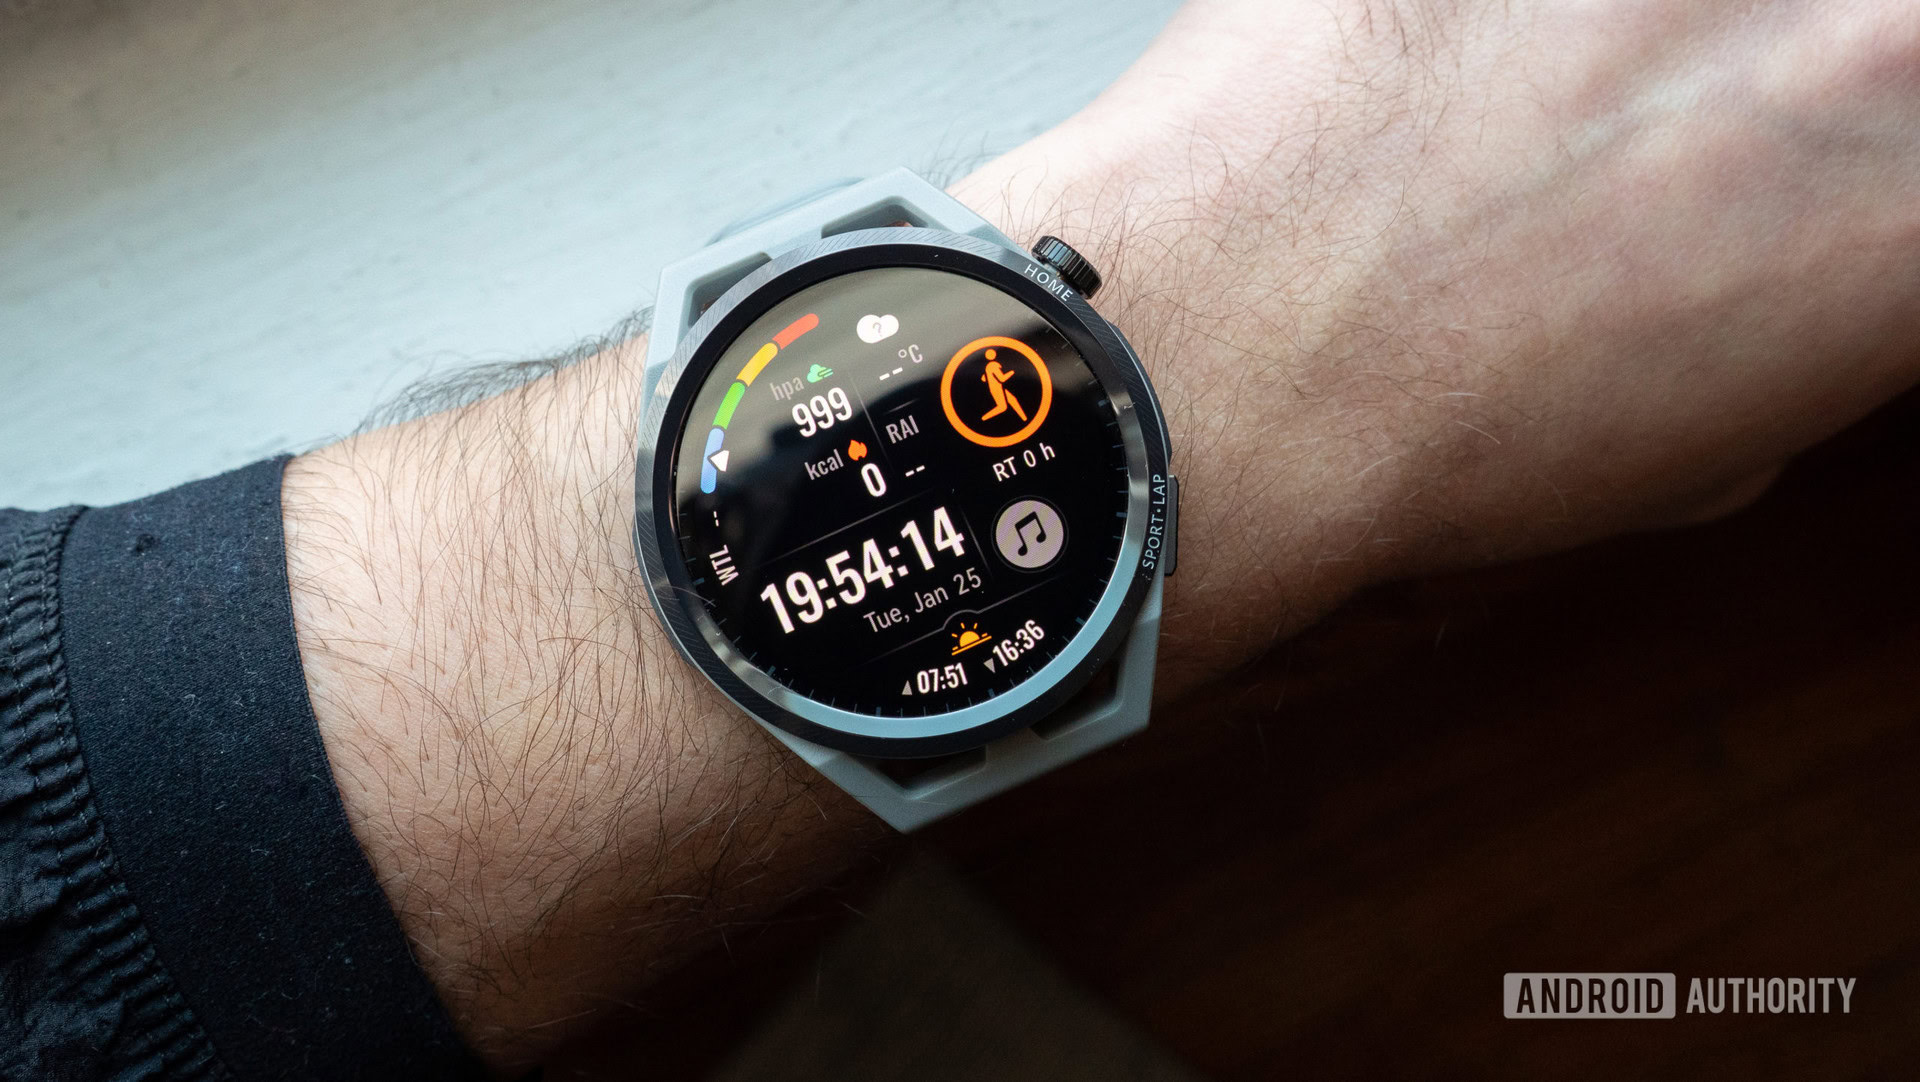 HUAWEI Watch GT Runner launching globally - Android Authority